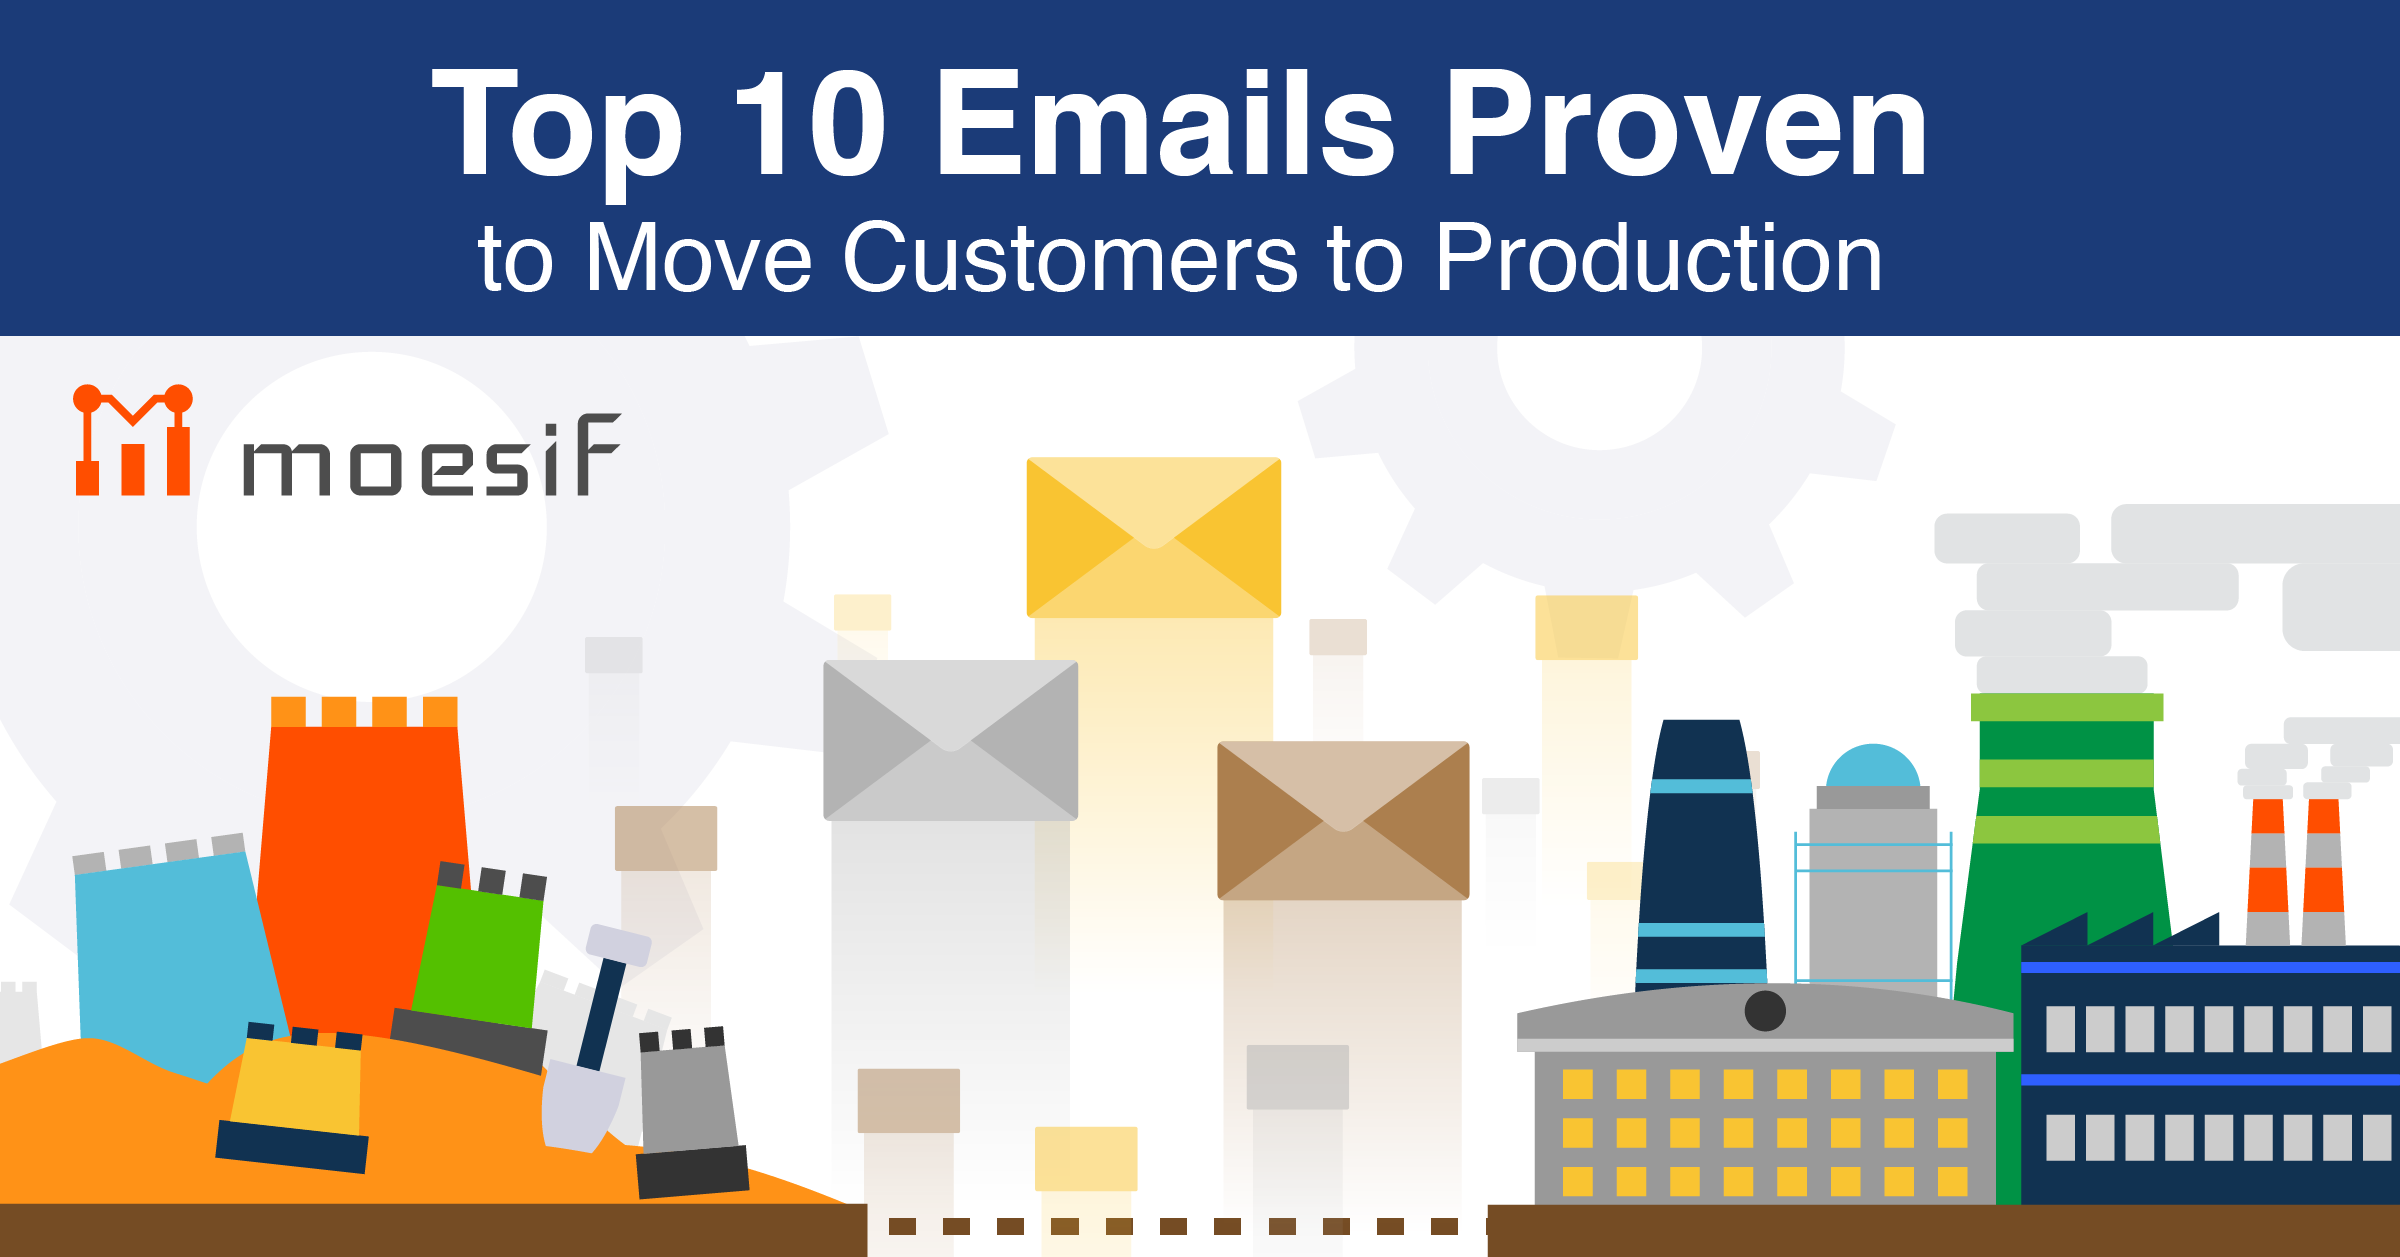 Top 10 Email Topics Proven to Move Customers to Production